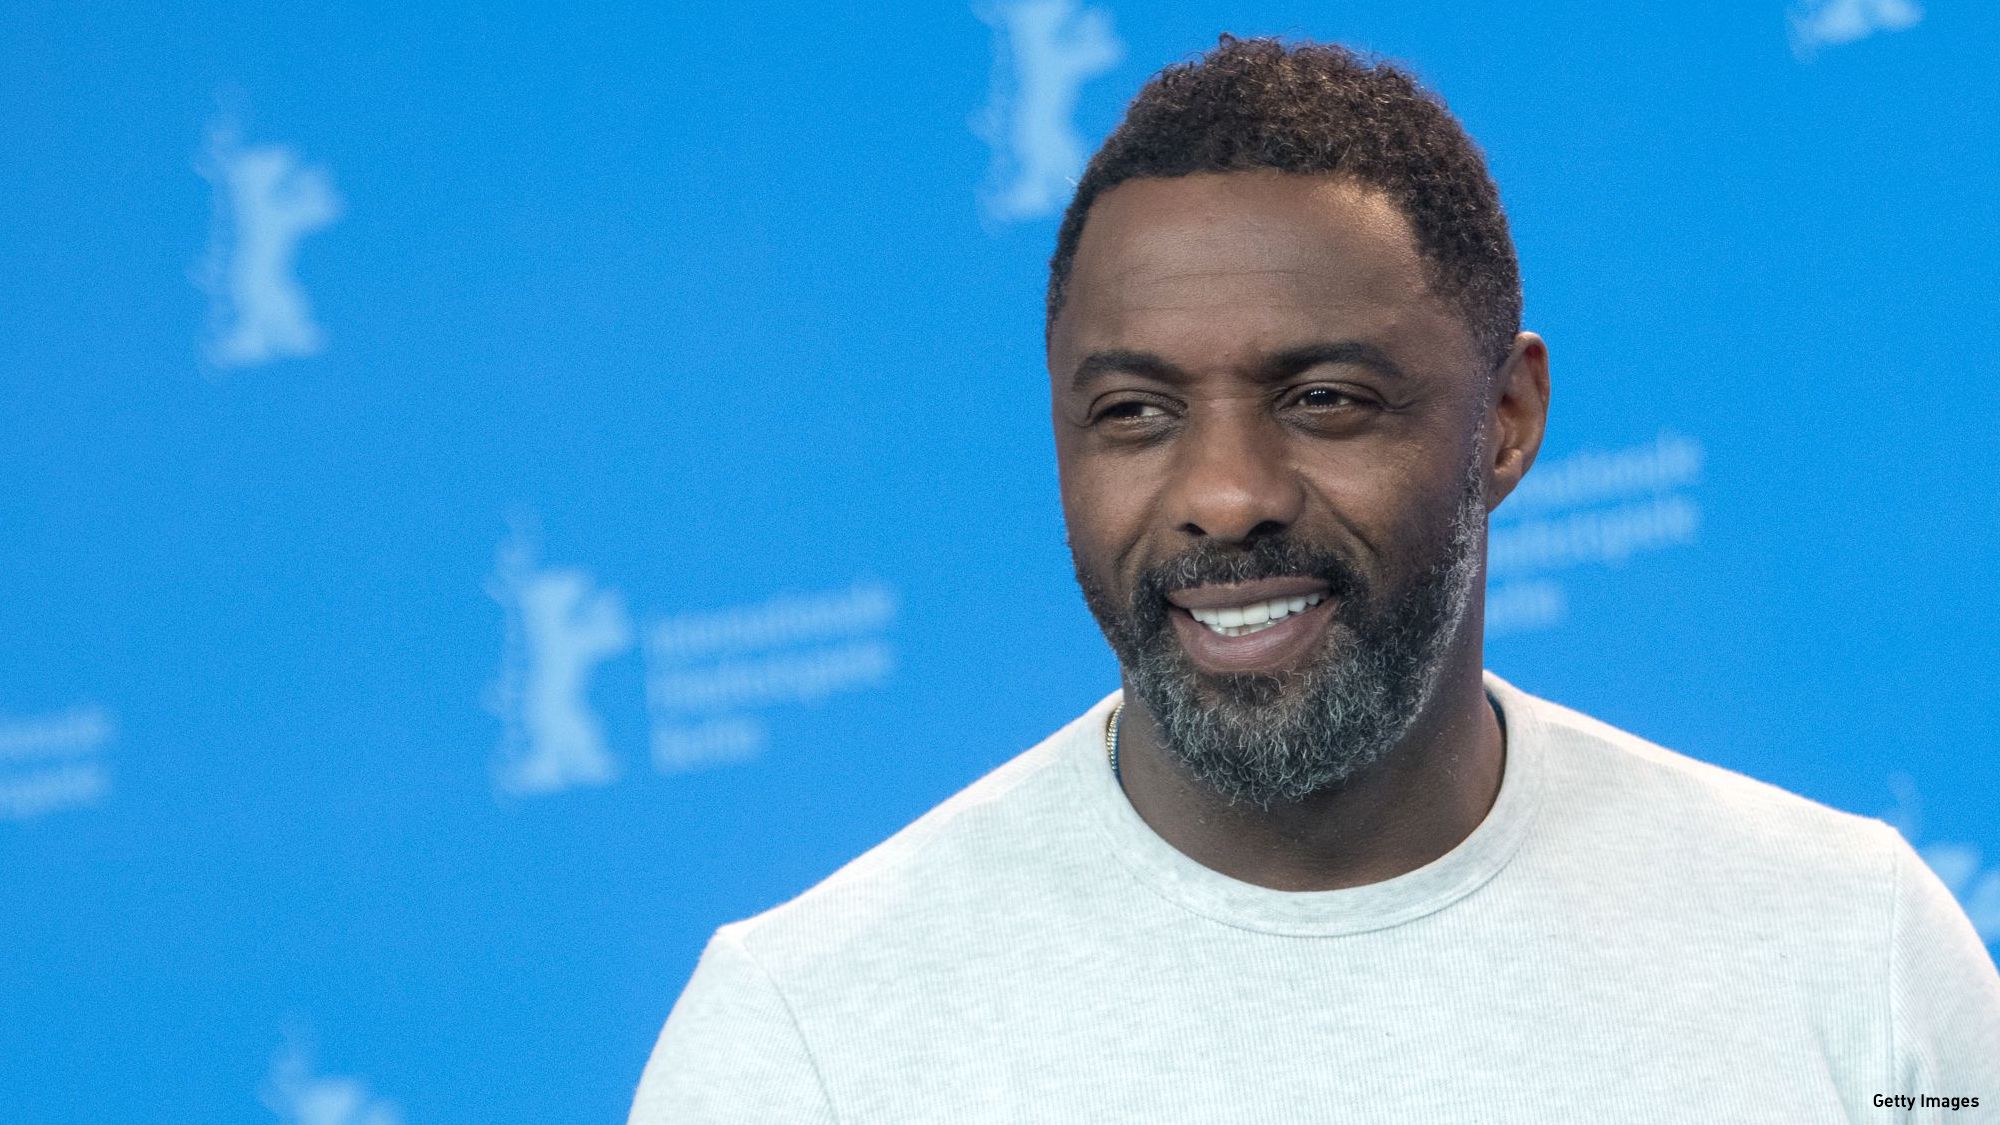 Casting News: Idris Elba to Fight for Survival Against Lion in Thriller ...